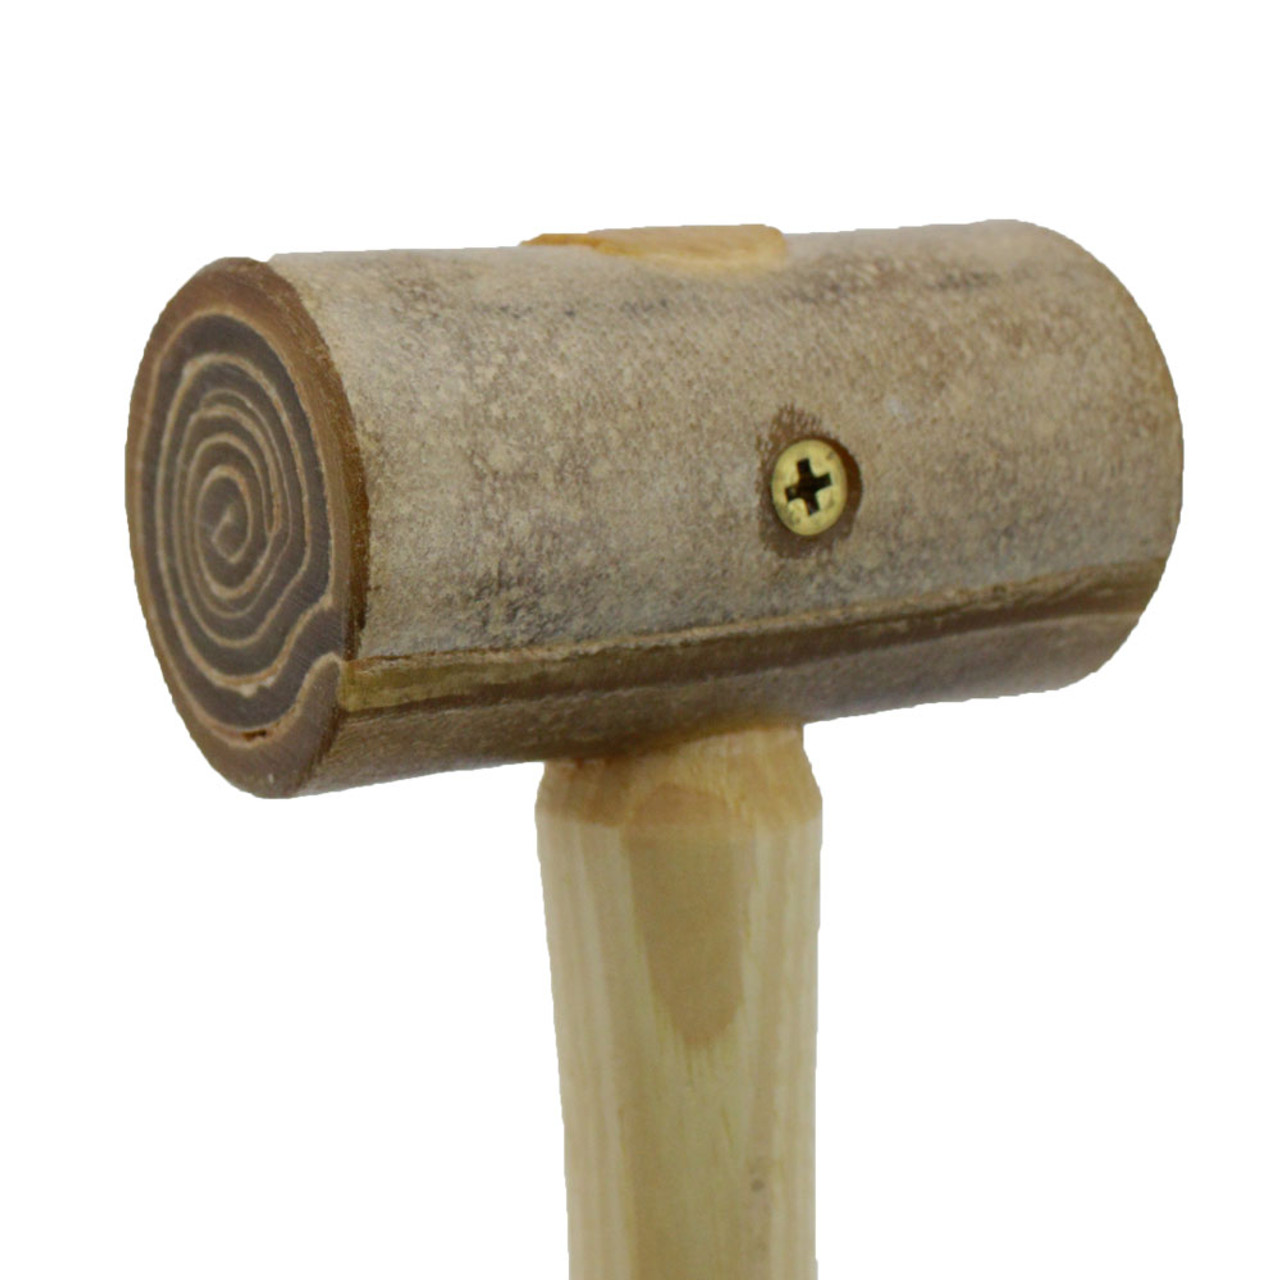 Premium Rawhide Mallet Hammer for Jewelry or Metal 9 oz. - Hammers, Mallet